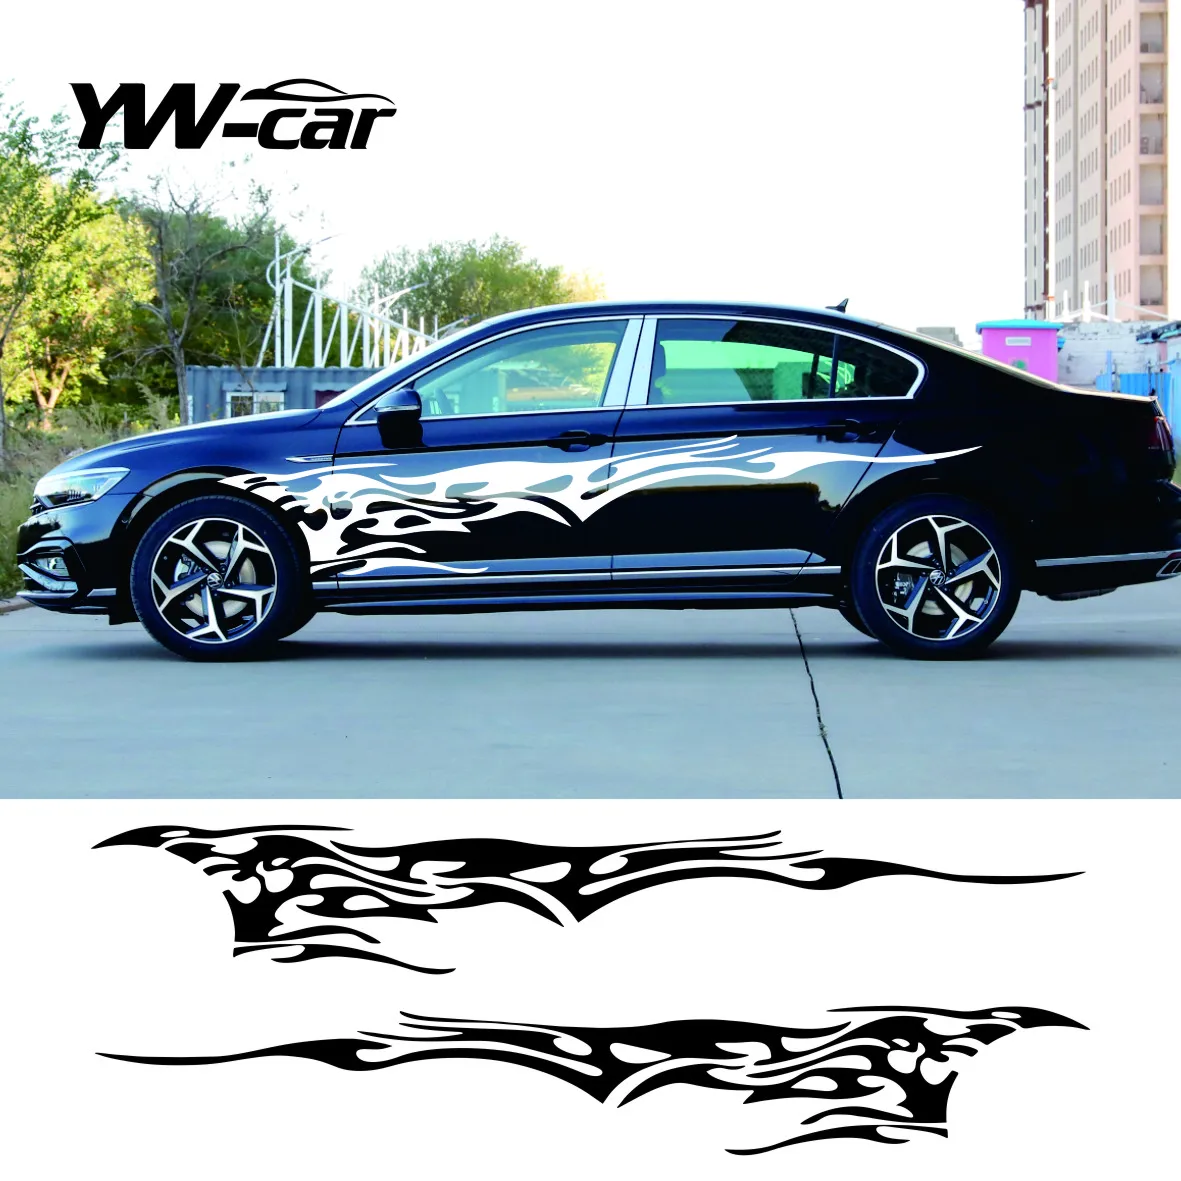 

Stylish Car Vinyl Decal Graphics Side Flame Element Stickers Body GenericRacing Decal Sticker Auto Car Accessories Sport Style